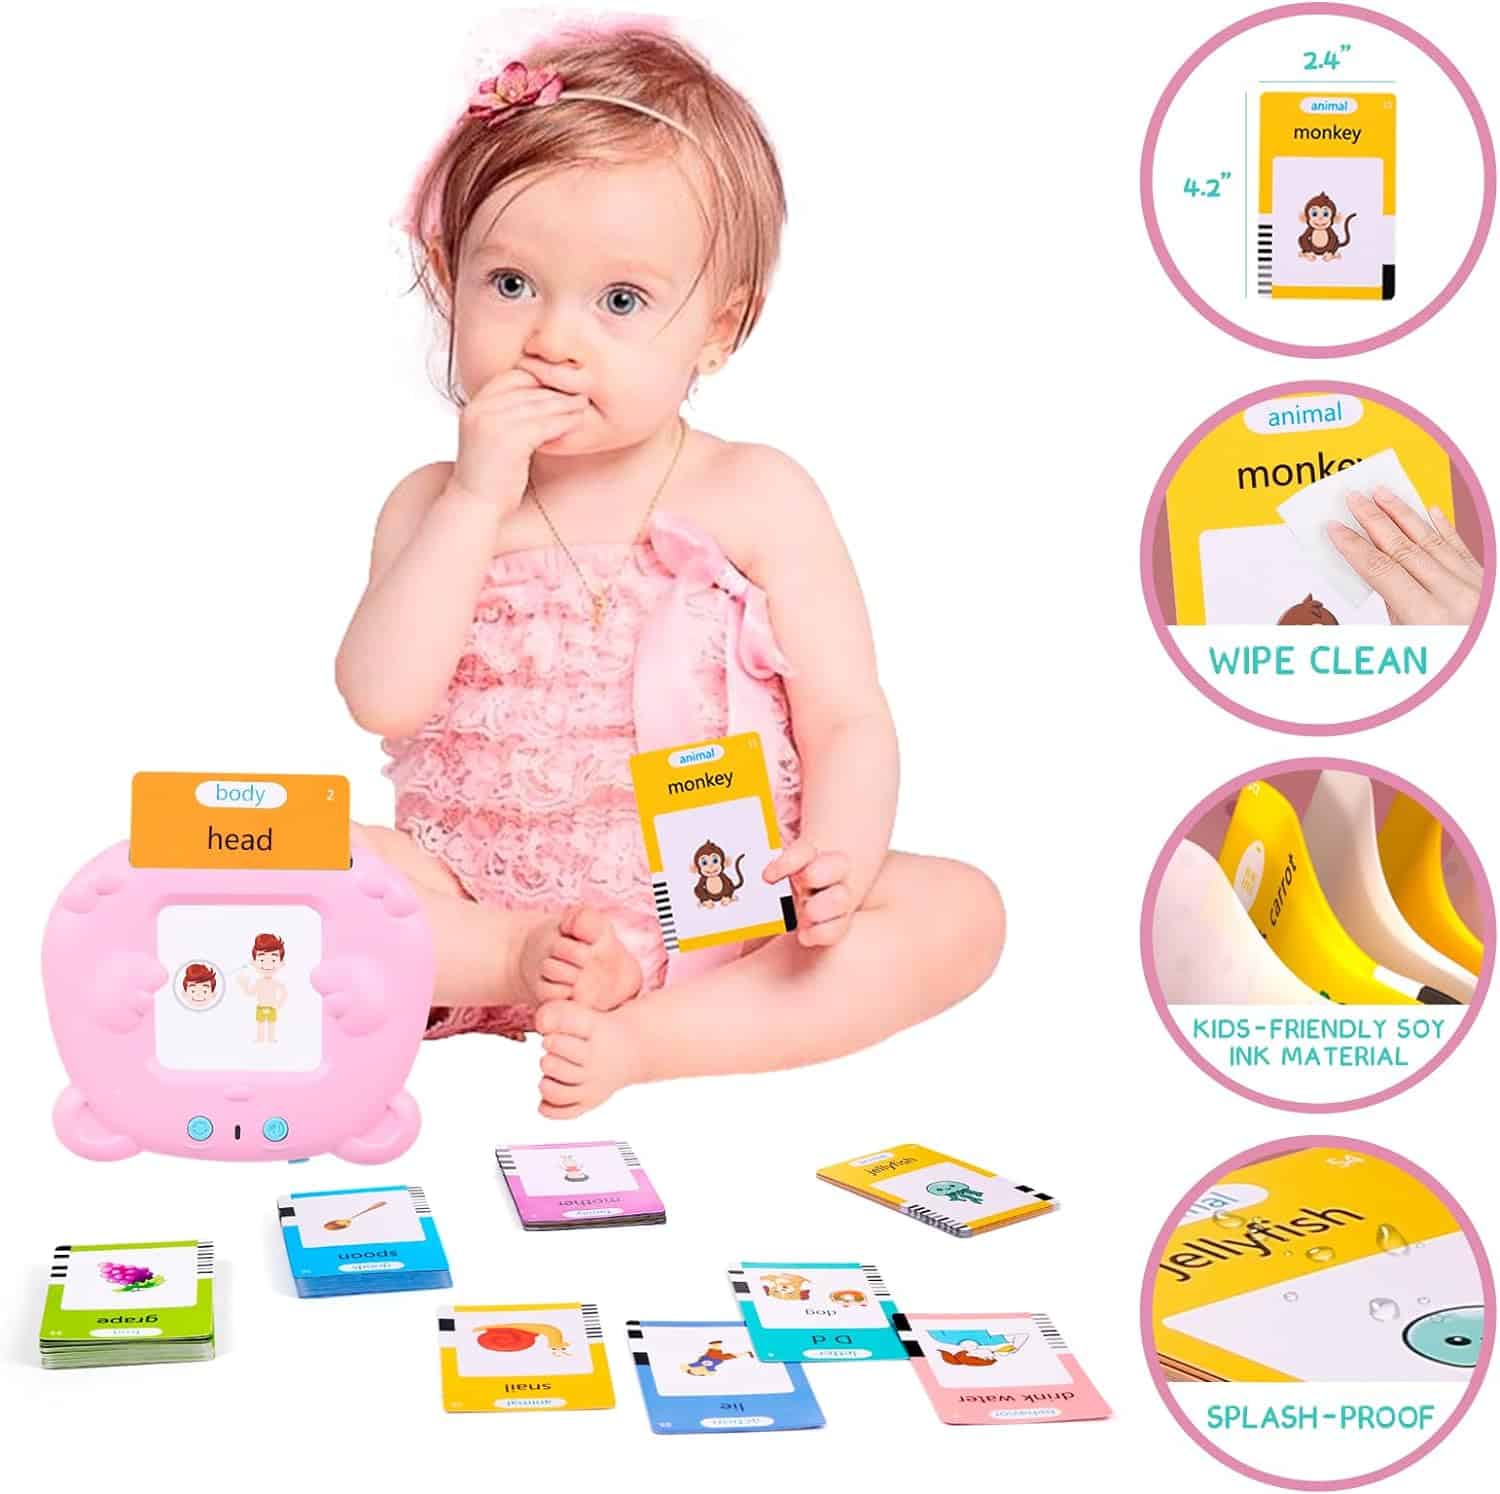 Toddle Toys for 2-6 Year Olds: An Educational Learning Flash Card Set